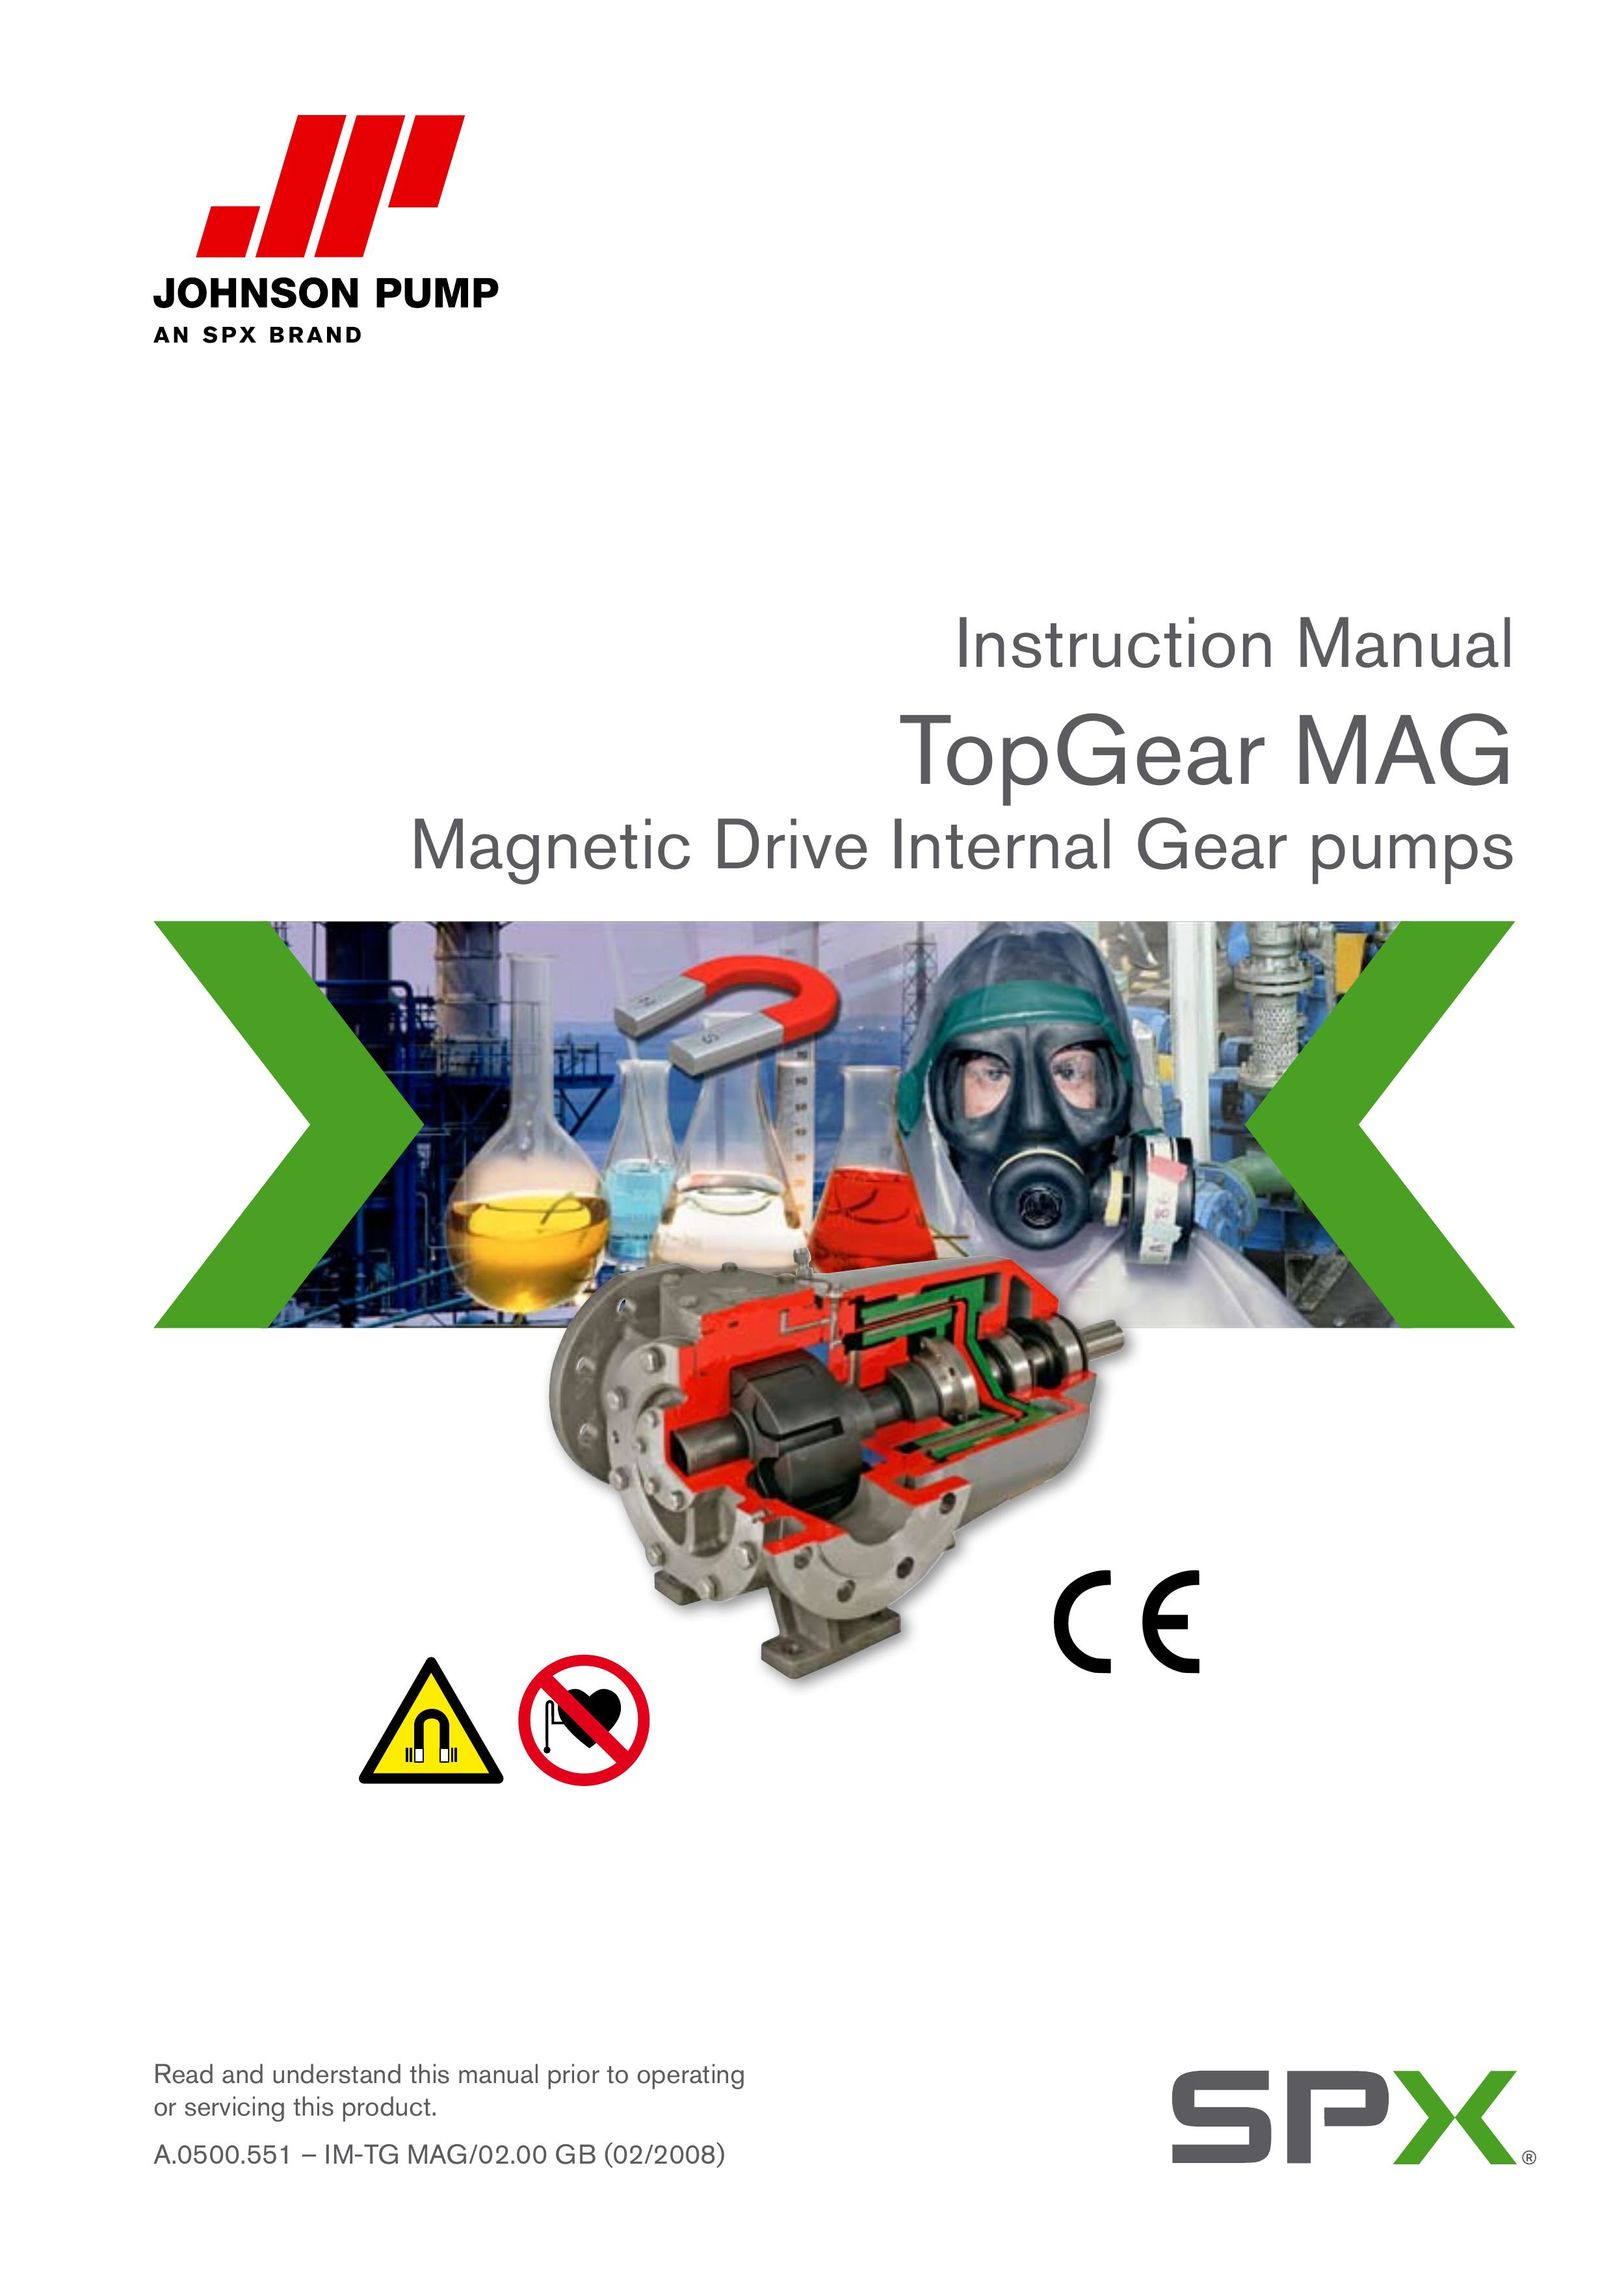 SPX Cooling Technologies TG MAG23-65 Water Pump User Manual